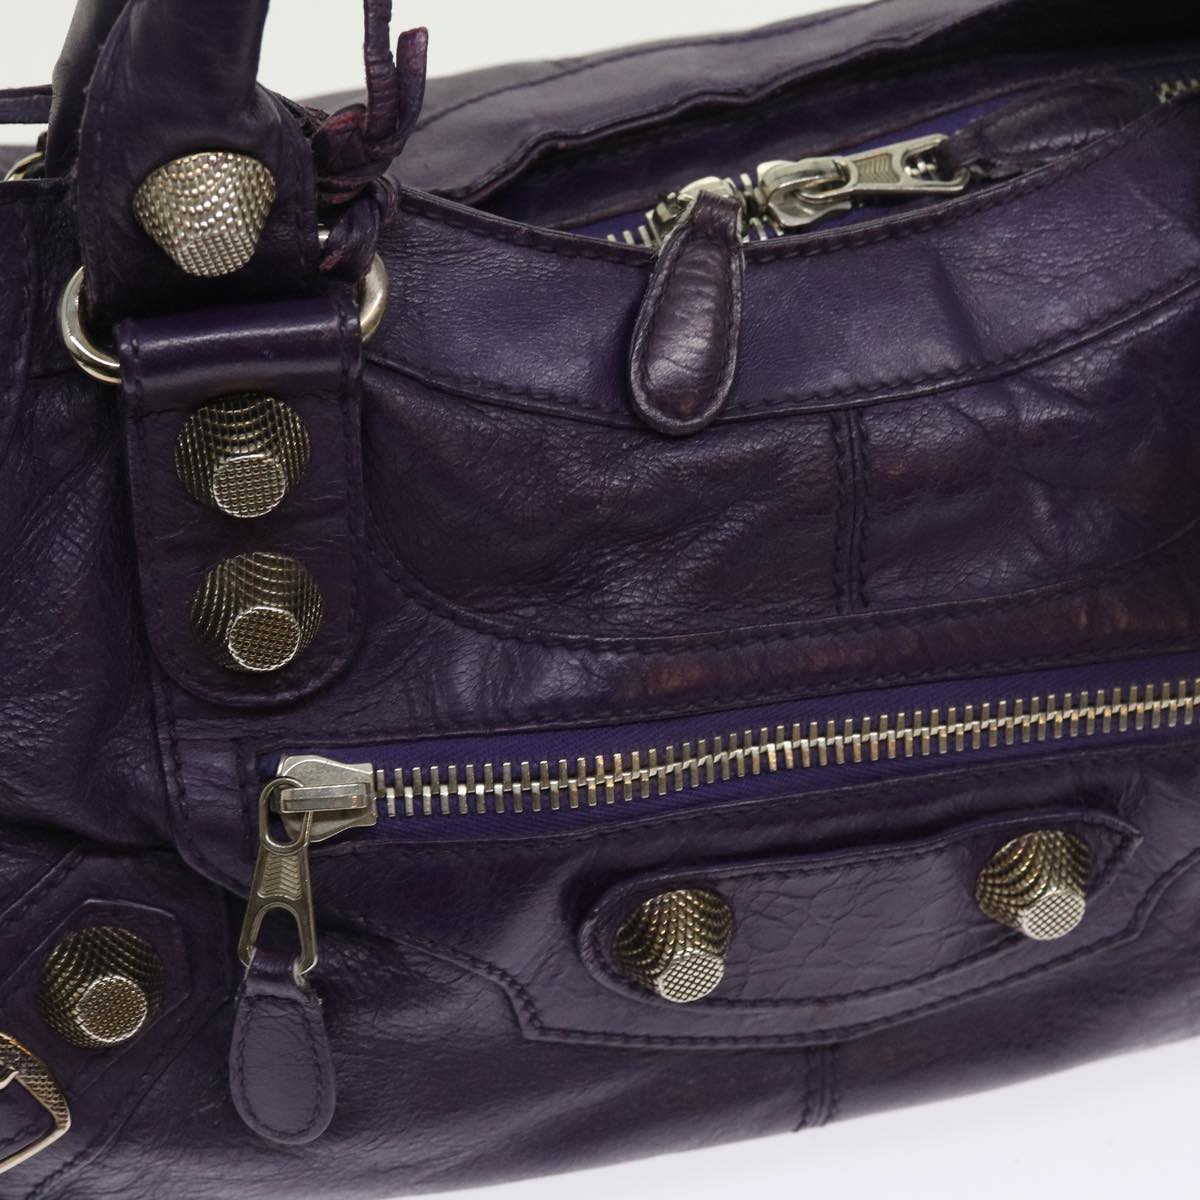 BALENCIAGA Part Time Giant Hand Bag Leather 2way Purple Auth 56666